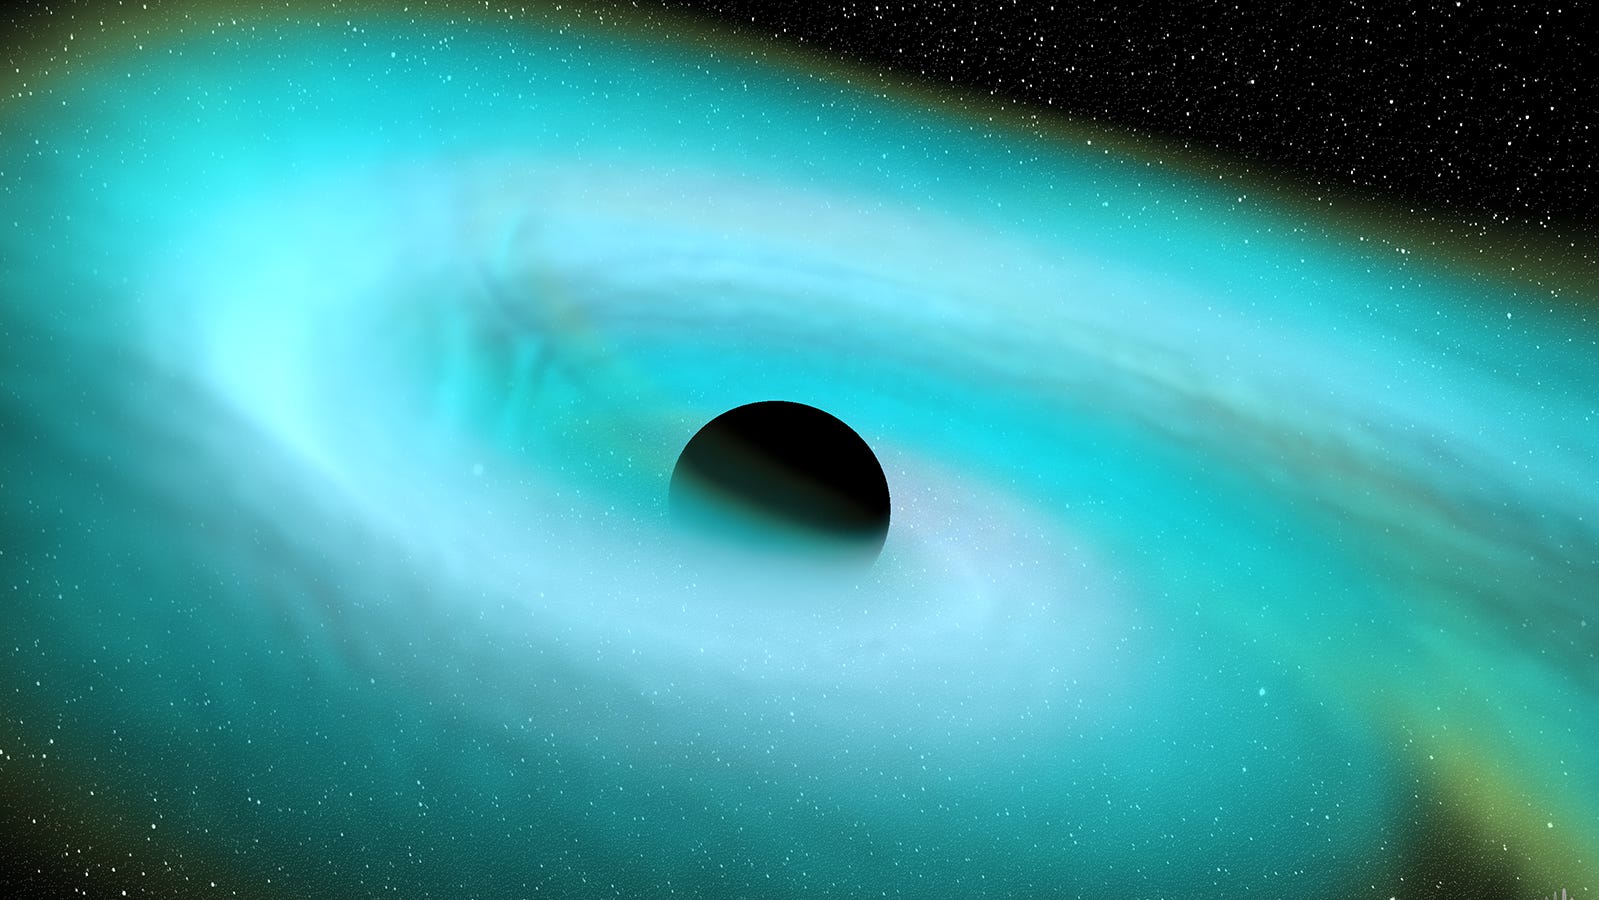 Texas Scientists Are First To Observe Black Hole Swallow Neutron Star